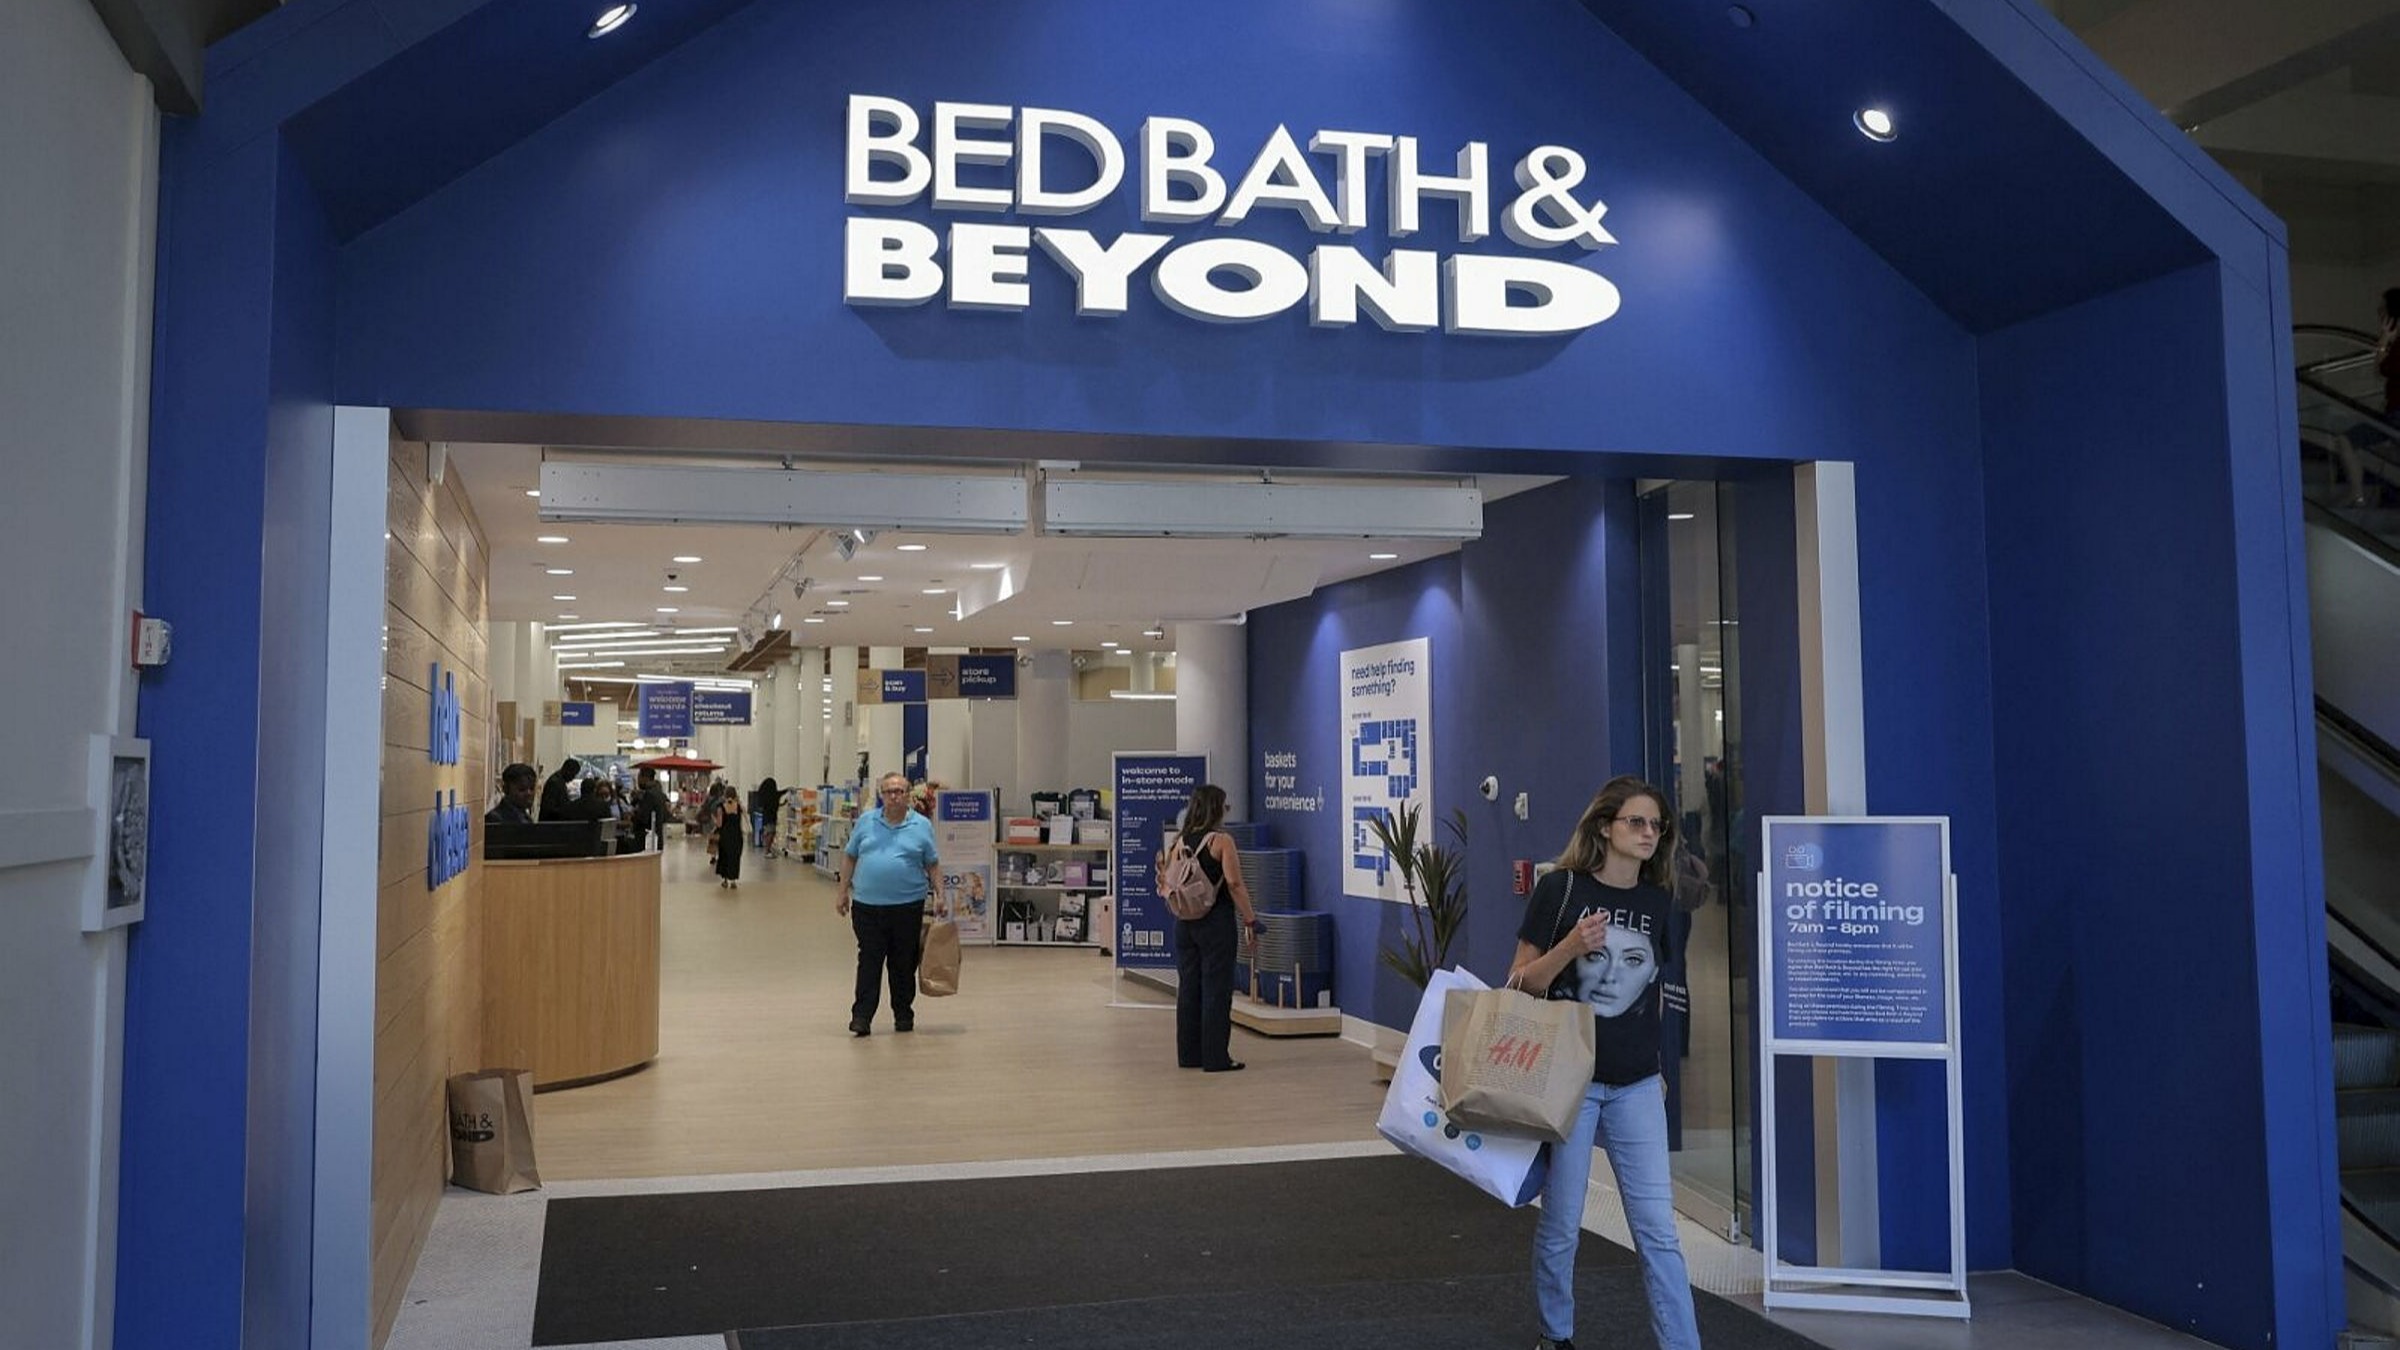 Bed Bath & Beyond Inc.’s (NASDAQ:BBBY) Drops on Files A Shelf Registration to Sell Common Stock